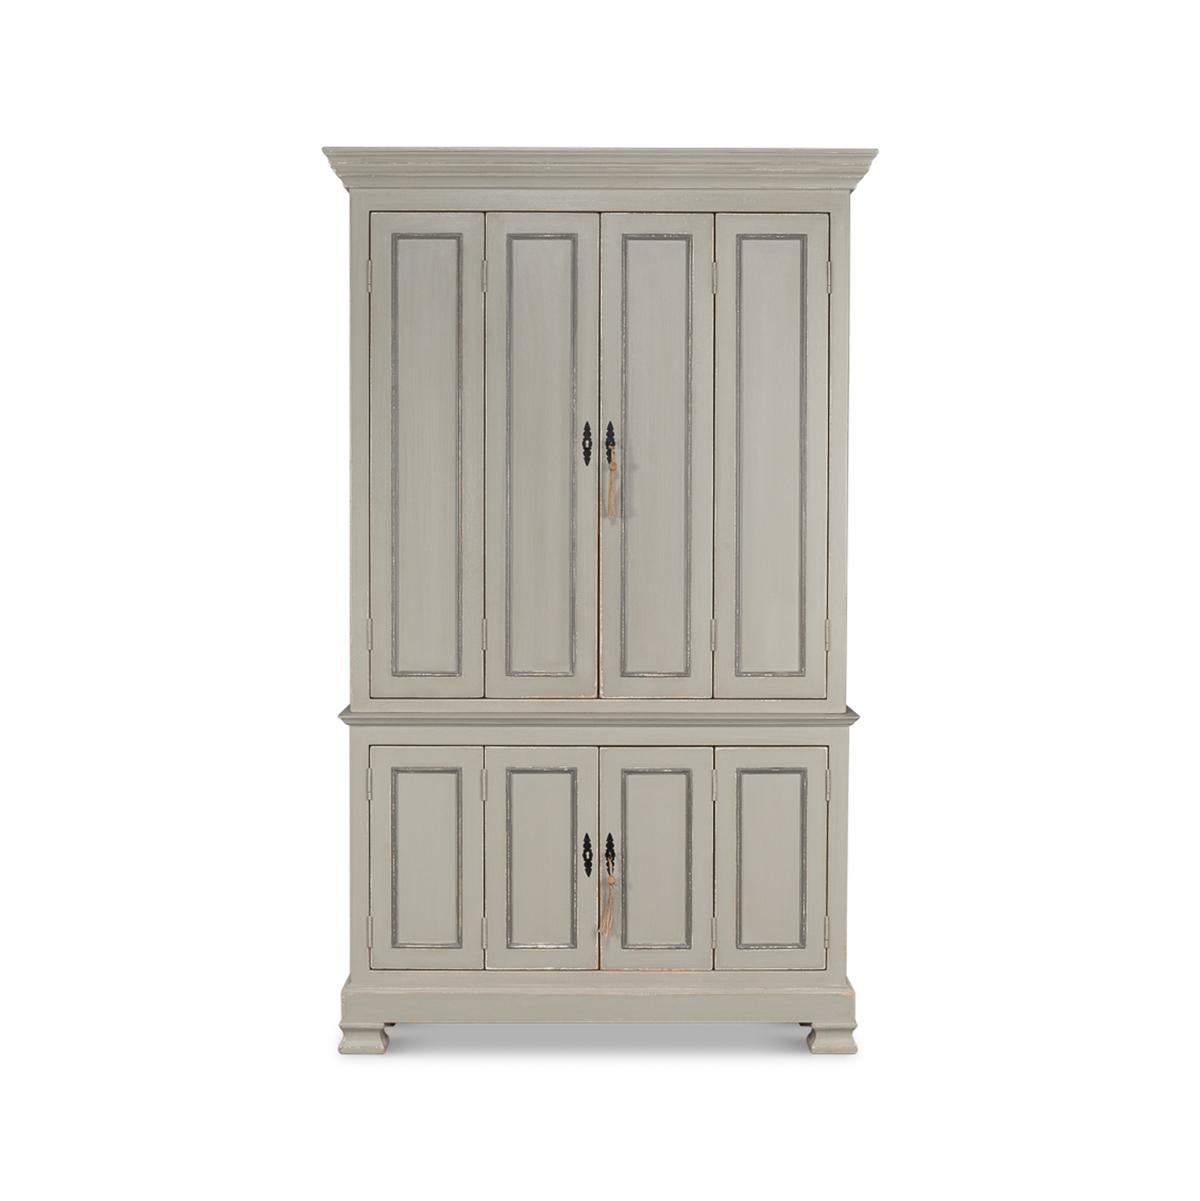 A North European provincial painted cabinet in an antique 18th century style with a distressed grey painted finish. A cabinet of grand size and scale, amply large with plentiful space for display or storage. This cabinet is crafted from